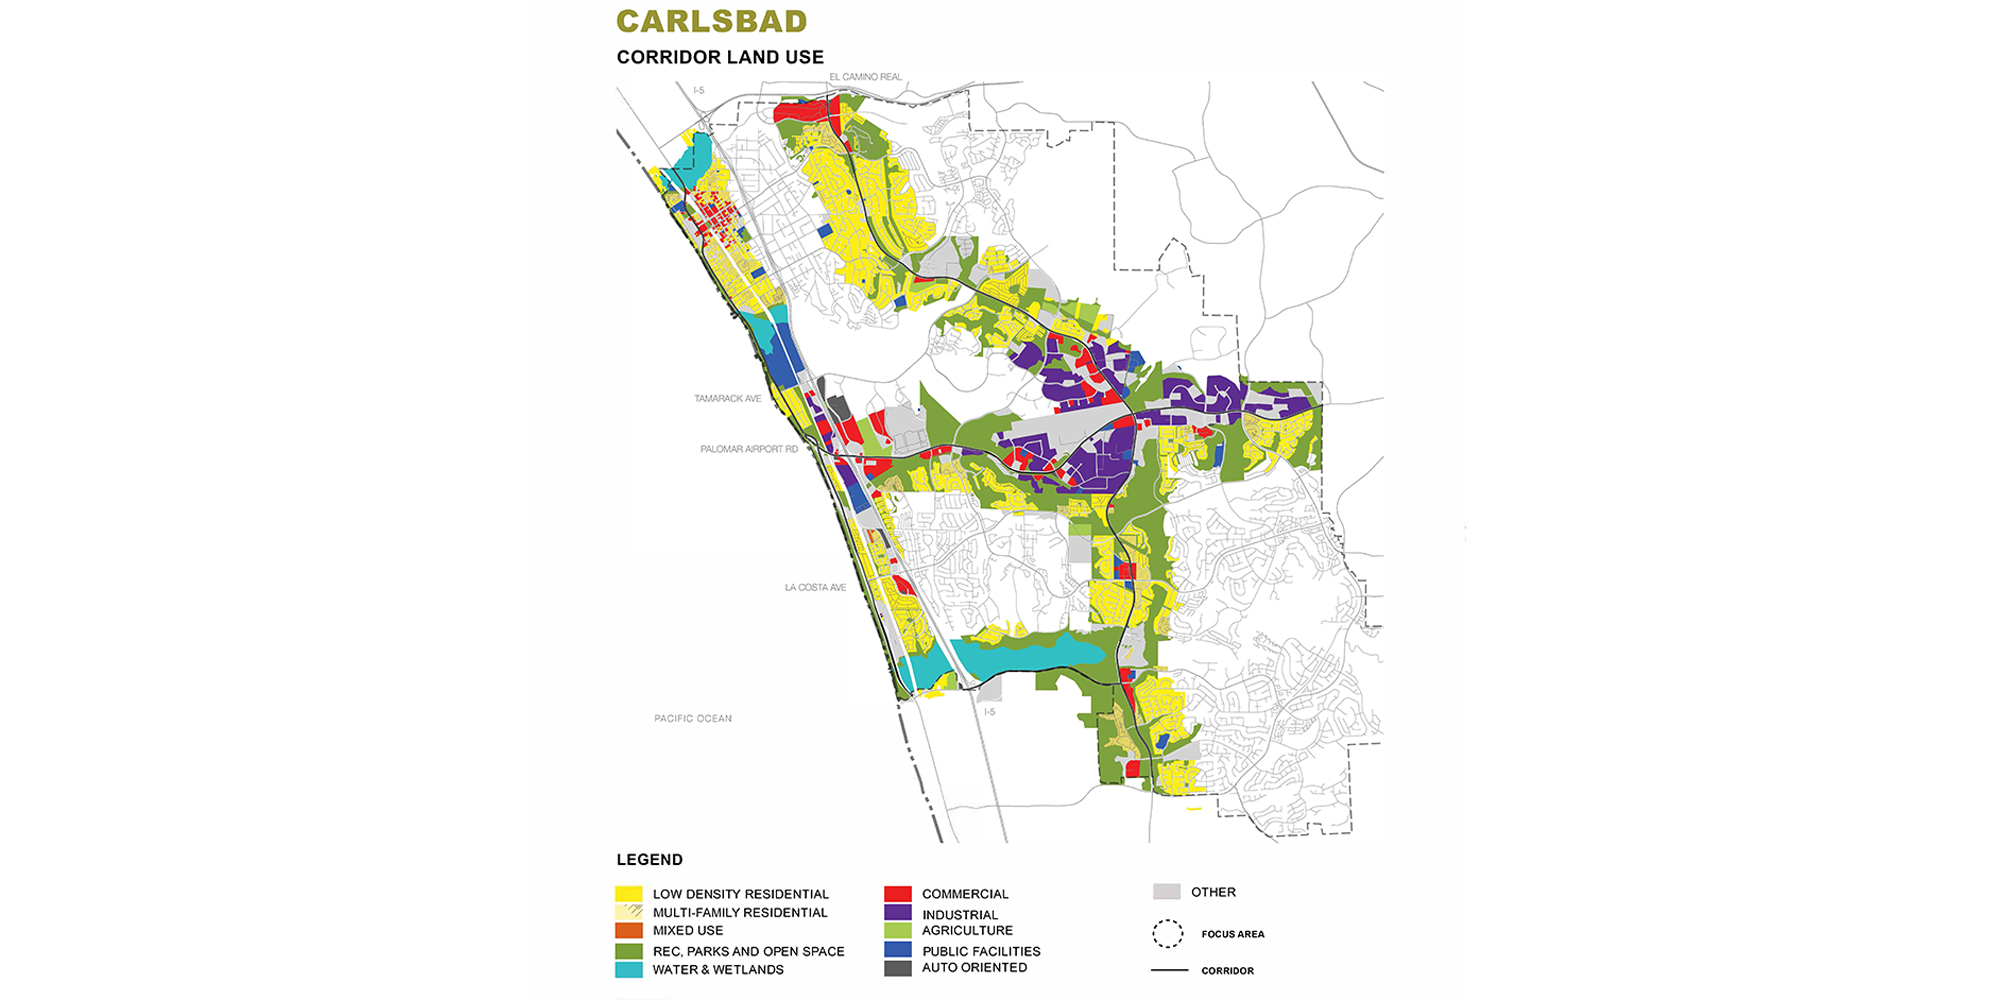 Map showing Carlsbad corridor land use. For full text, download project pdf below.